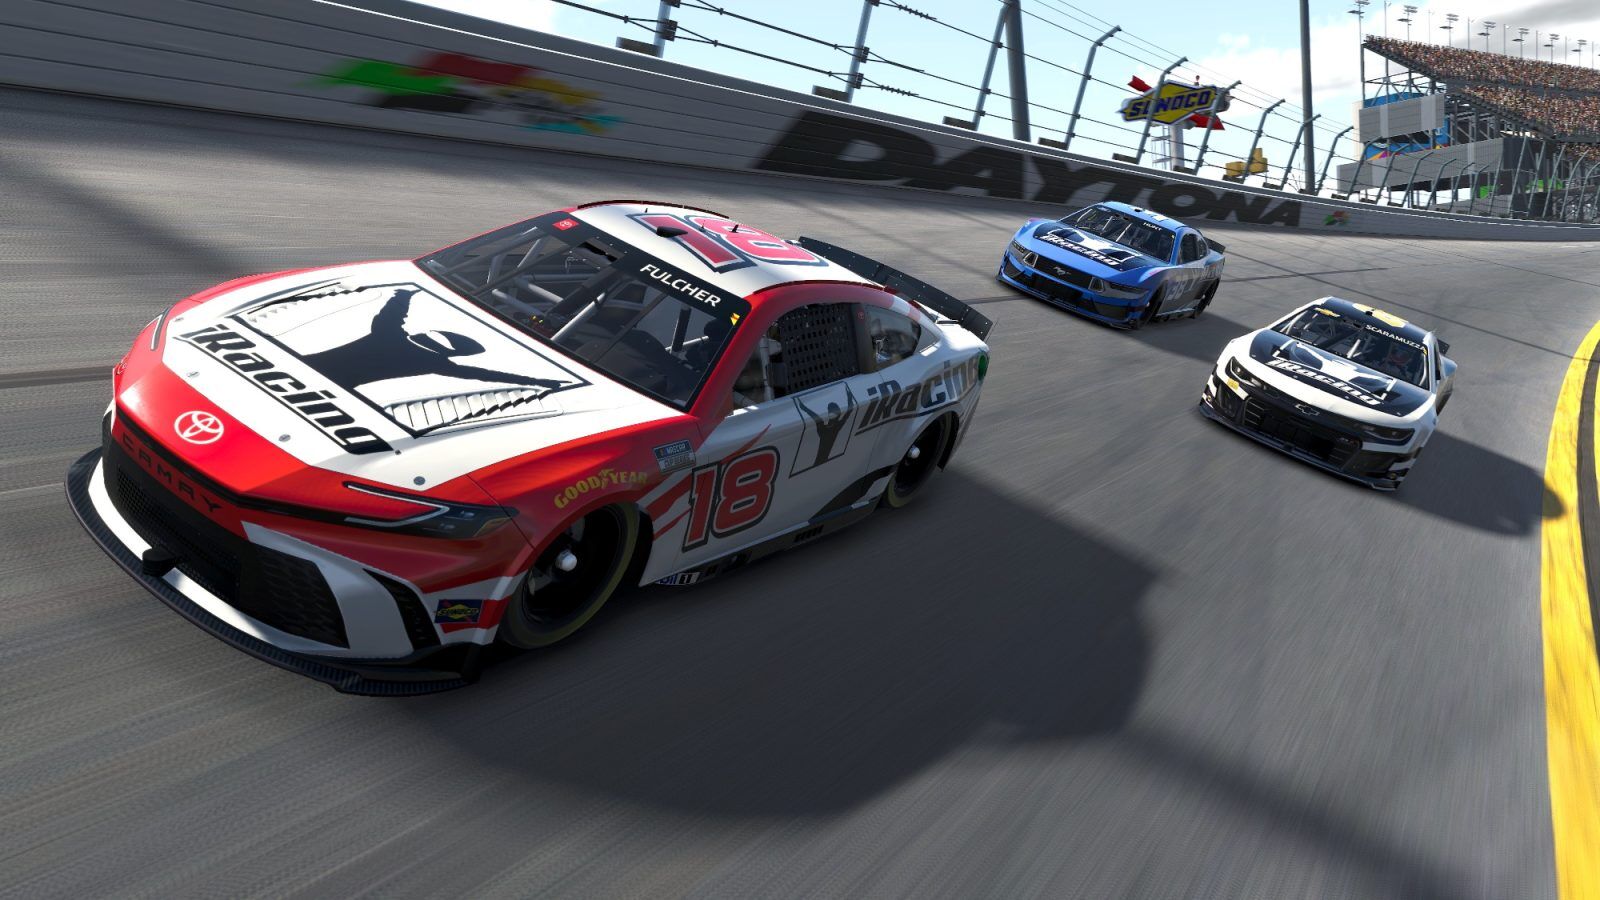 iRacing introduces updated NASCAR Cup cars, Scanning Mustang/Corvette GT3?